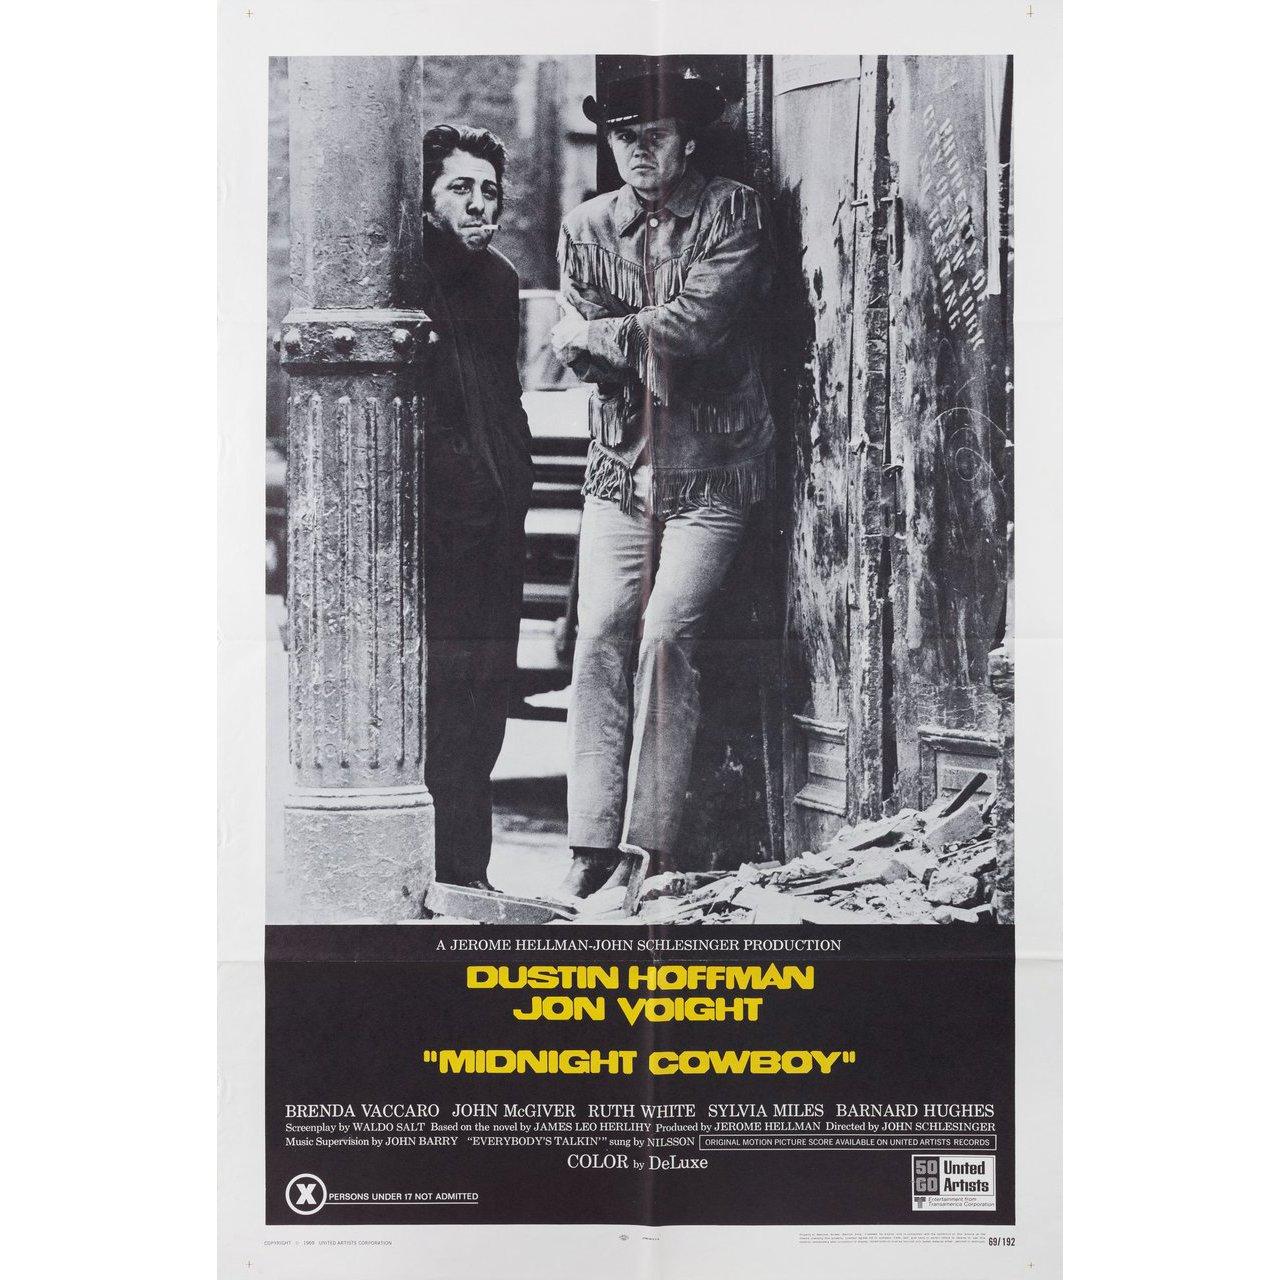 Original 1969 U.S. one sheet poster for the film Midnight Cowboy directed by John Schlesinger with Dustin Hoffman / Jon Voight / Sylvia Miles / John McGiver. Very Good condition, folded with pinholes. Many original posters were issued folded or were